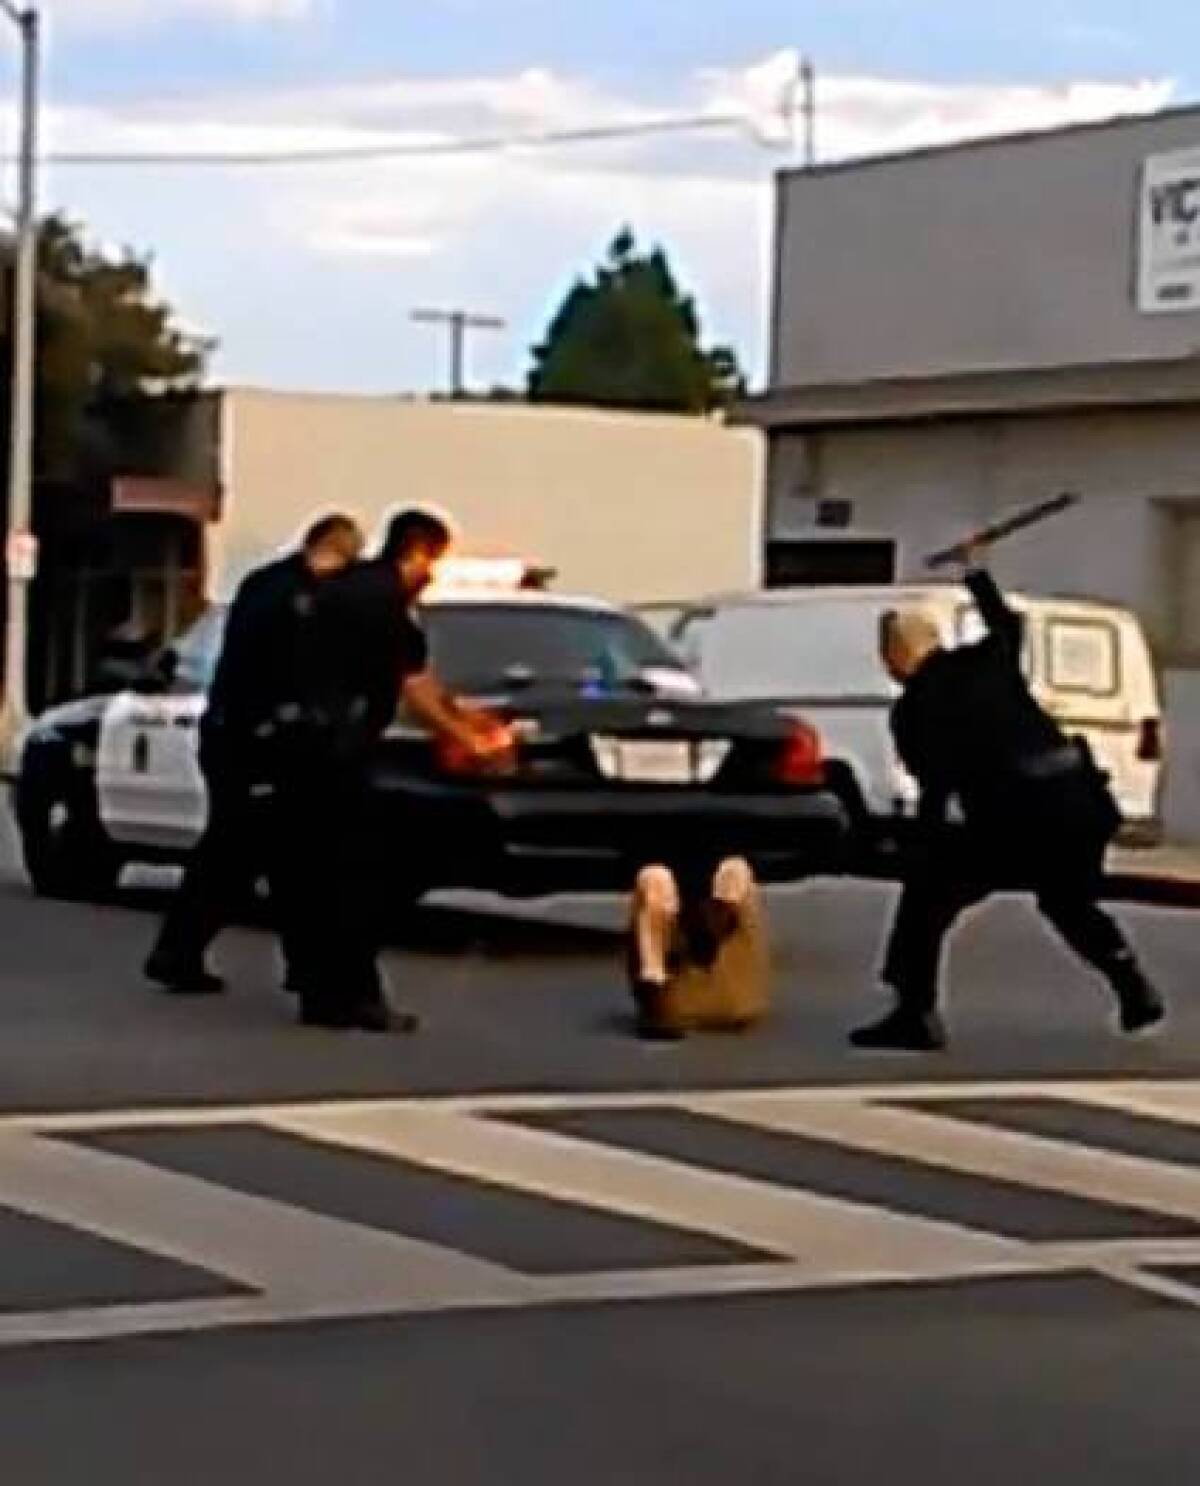 A video posted to YouTube showing Long Beach police repeatedly using a Taser and baton on a man has prompted an internal investigation amid questions about the officers' use of force.